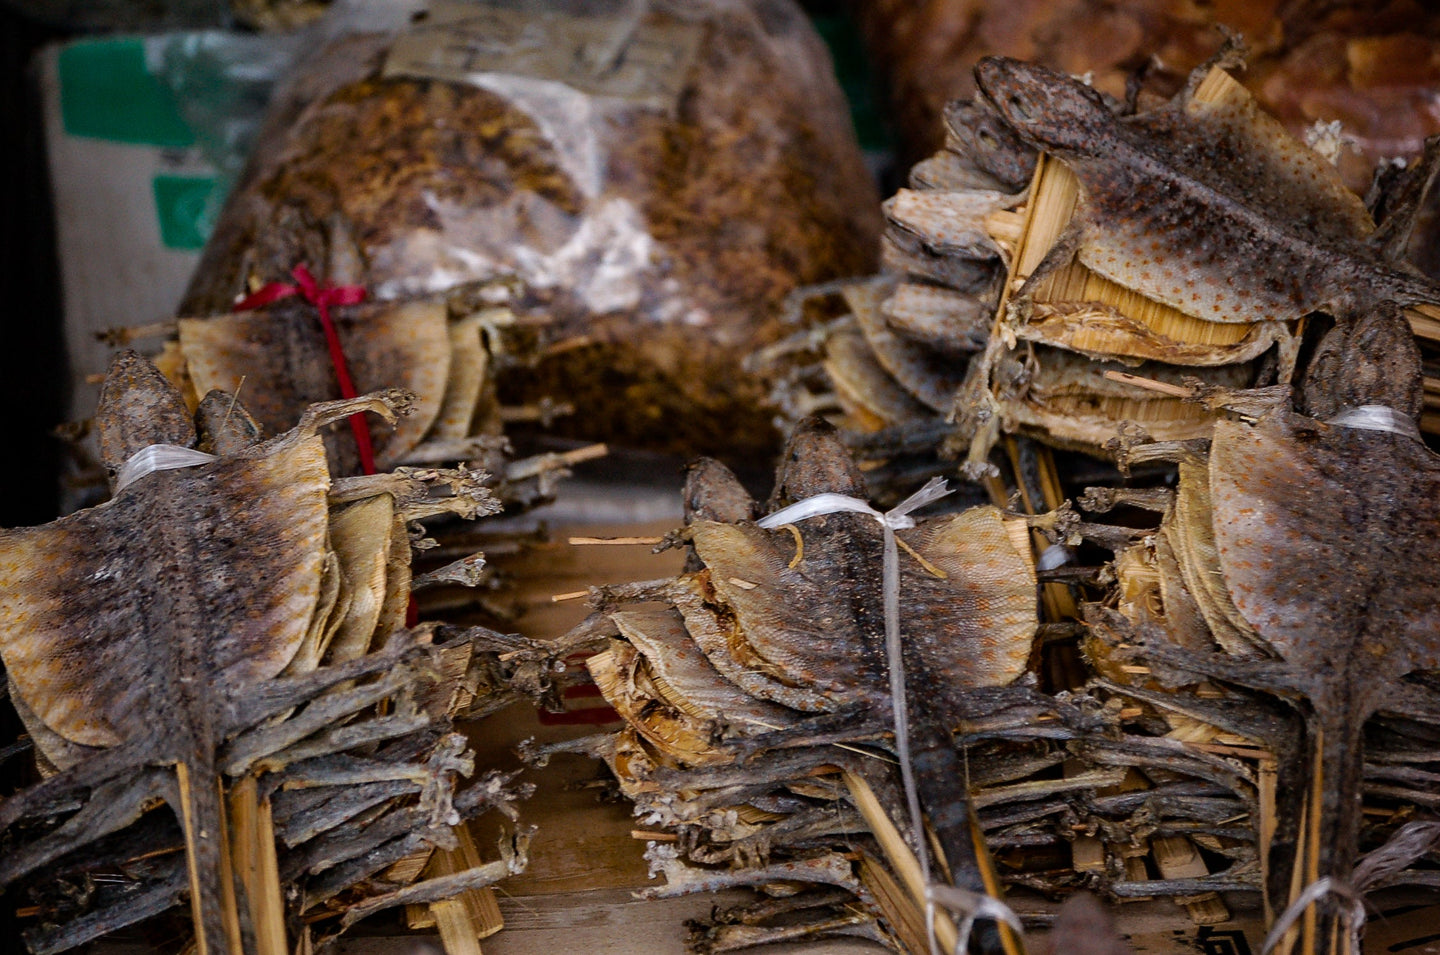 Dried Lizard to Eat in Chinese Street Market 5 x 7 / Colored Tracy McCrackin Photography - Tracy McCrackin Photography